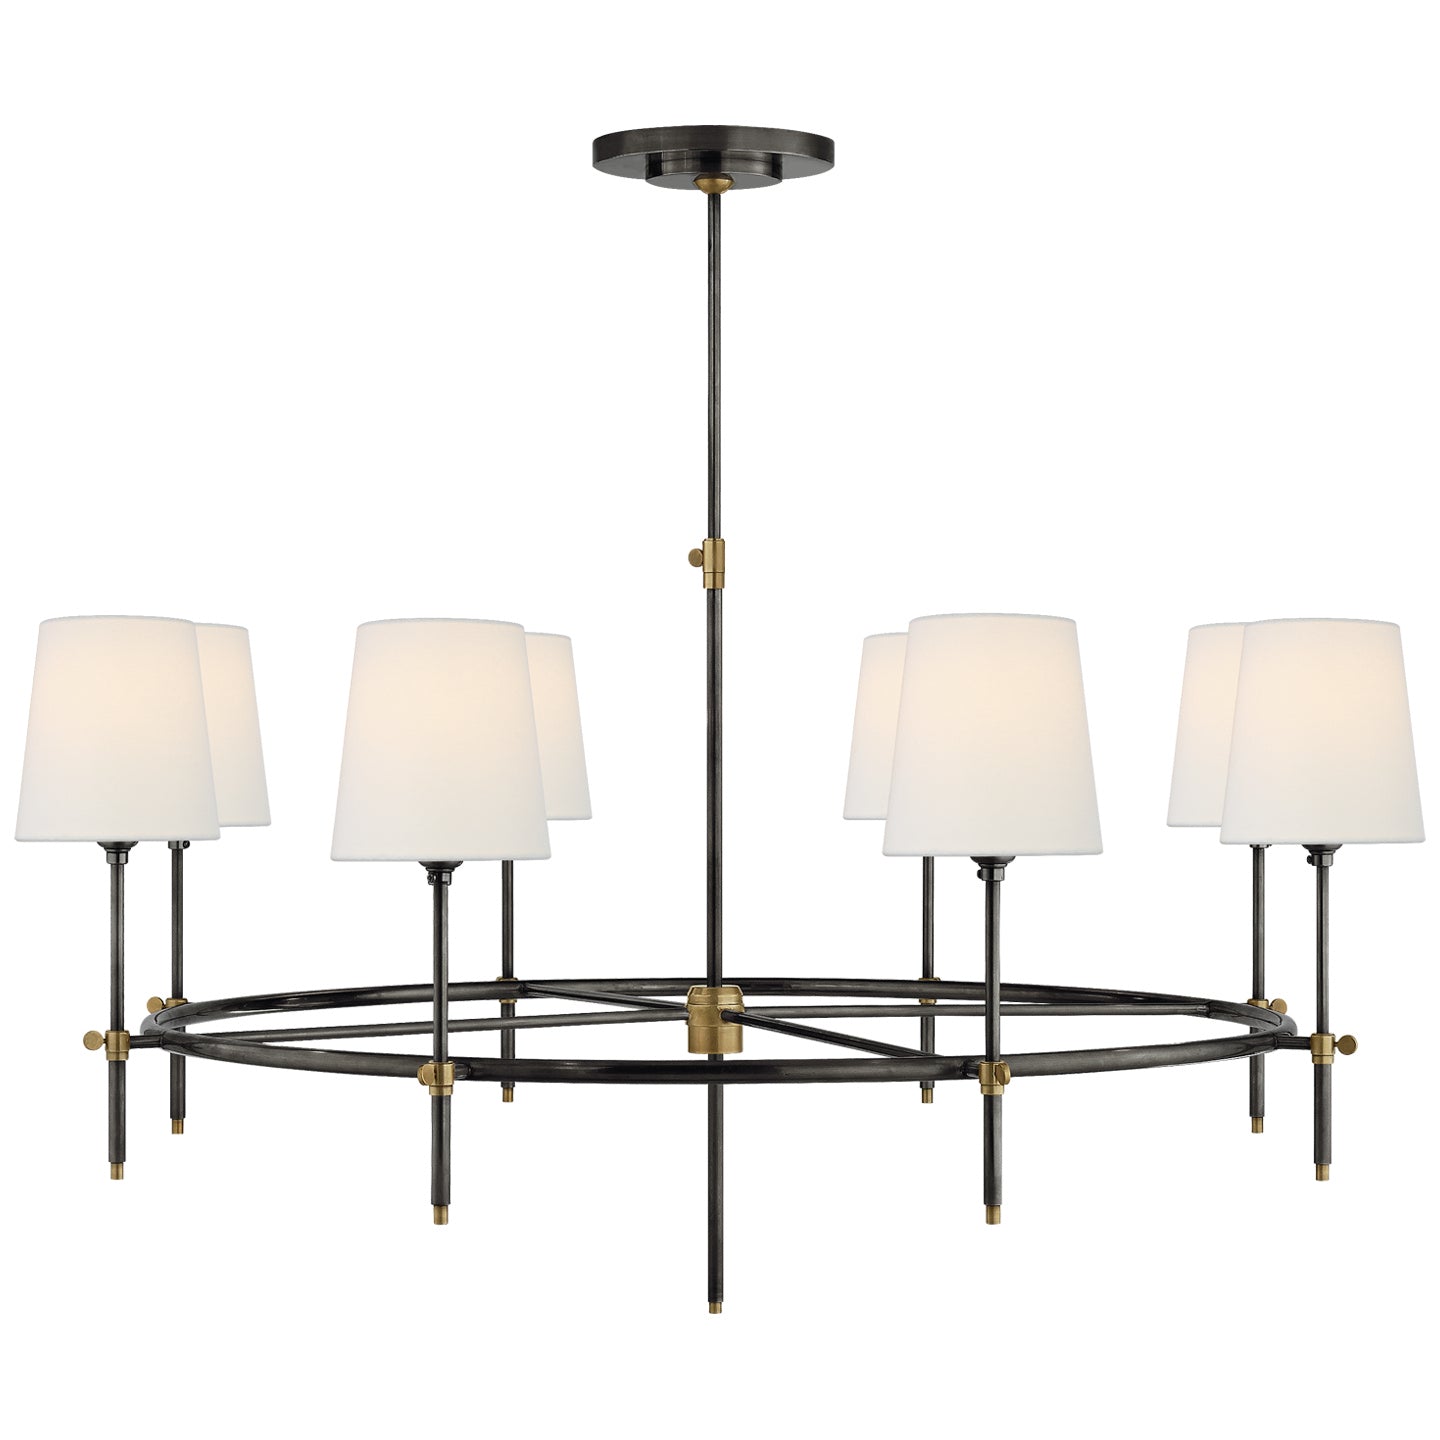 Visual Comfort Signature Canada - Eight Light Chandelier - Bryant - Bronze and Hand-Rubbed Antique Brass- Union Lighting Luminaires Decor